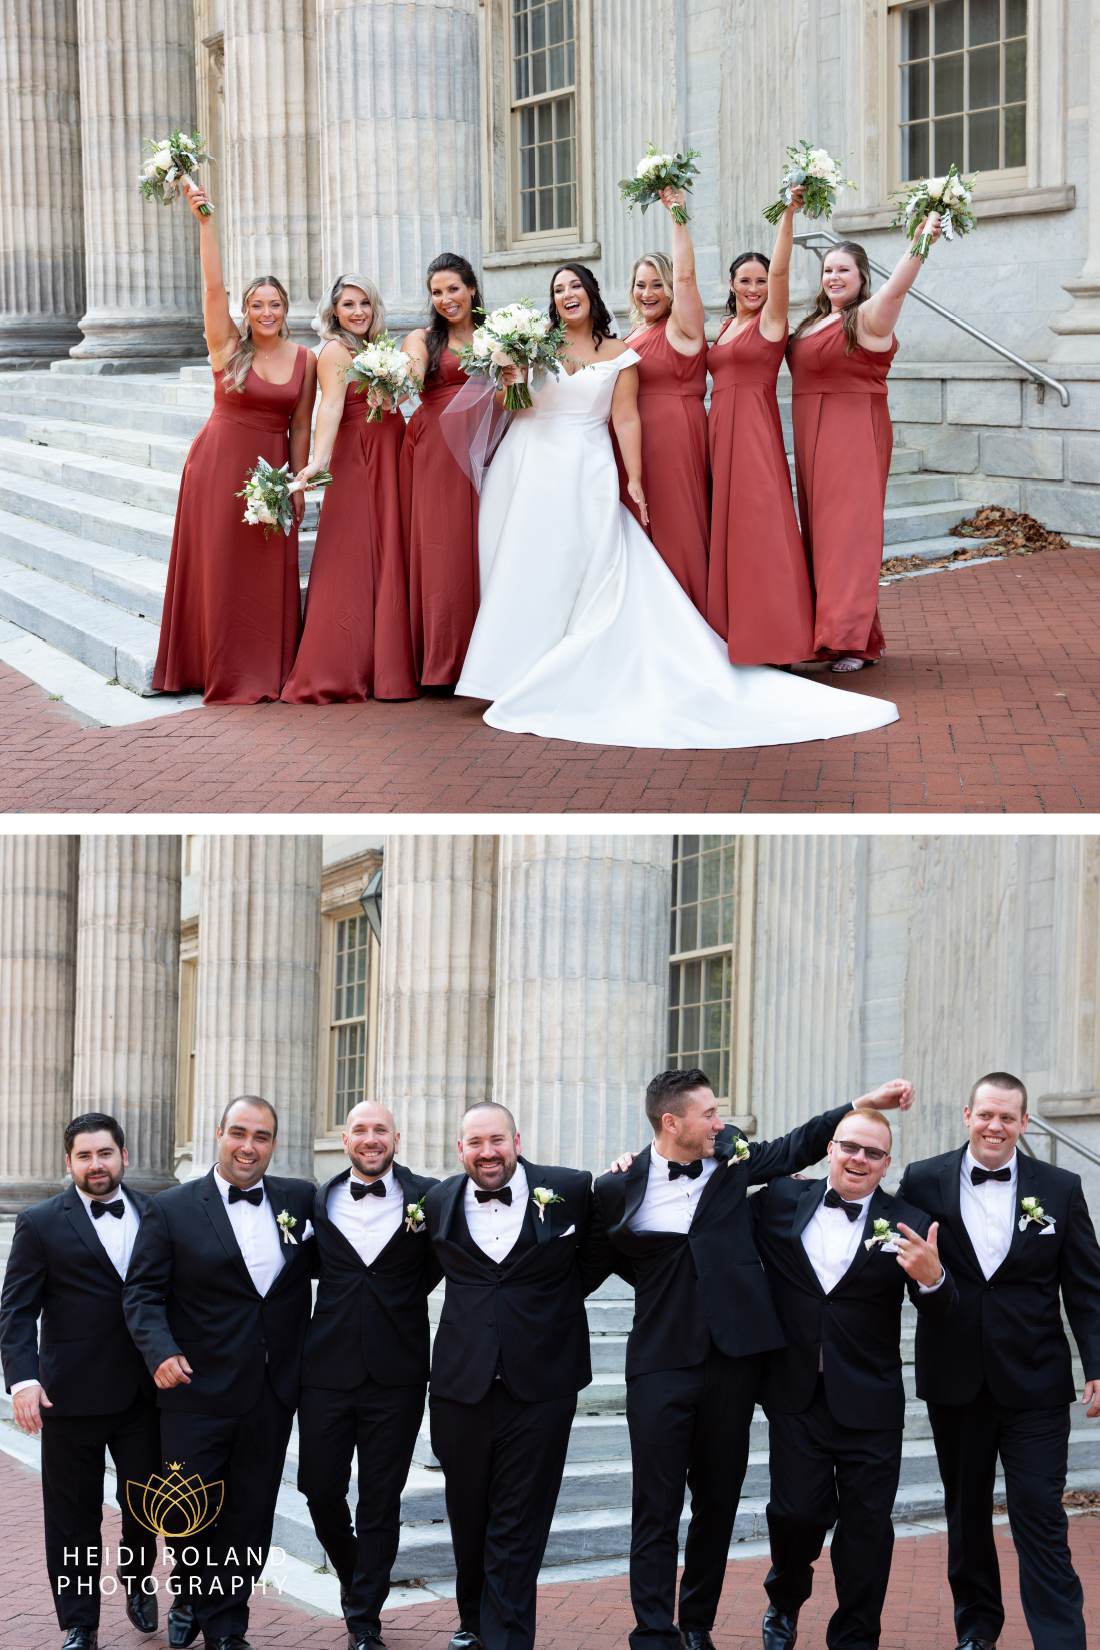 Bride with her bridesmaids and groom with his groomsmen having fun in philadelphia